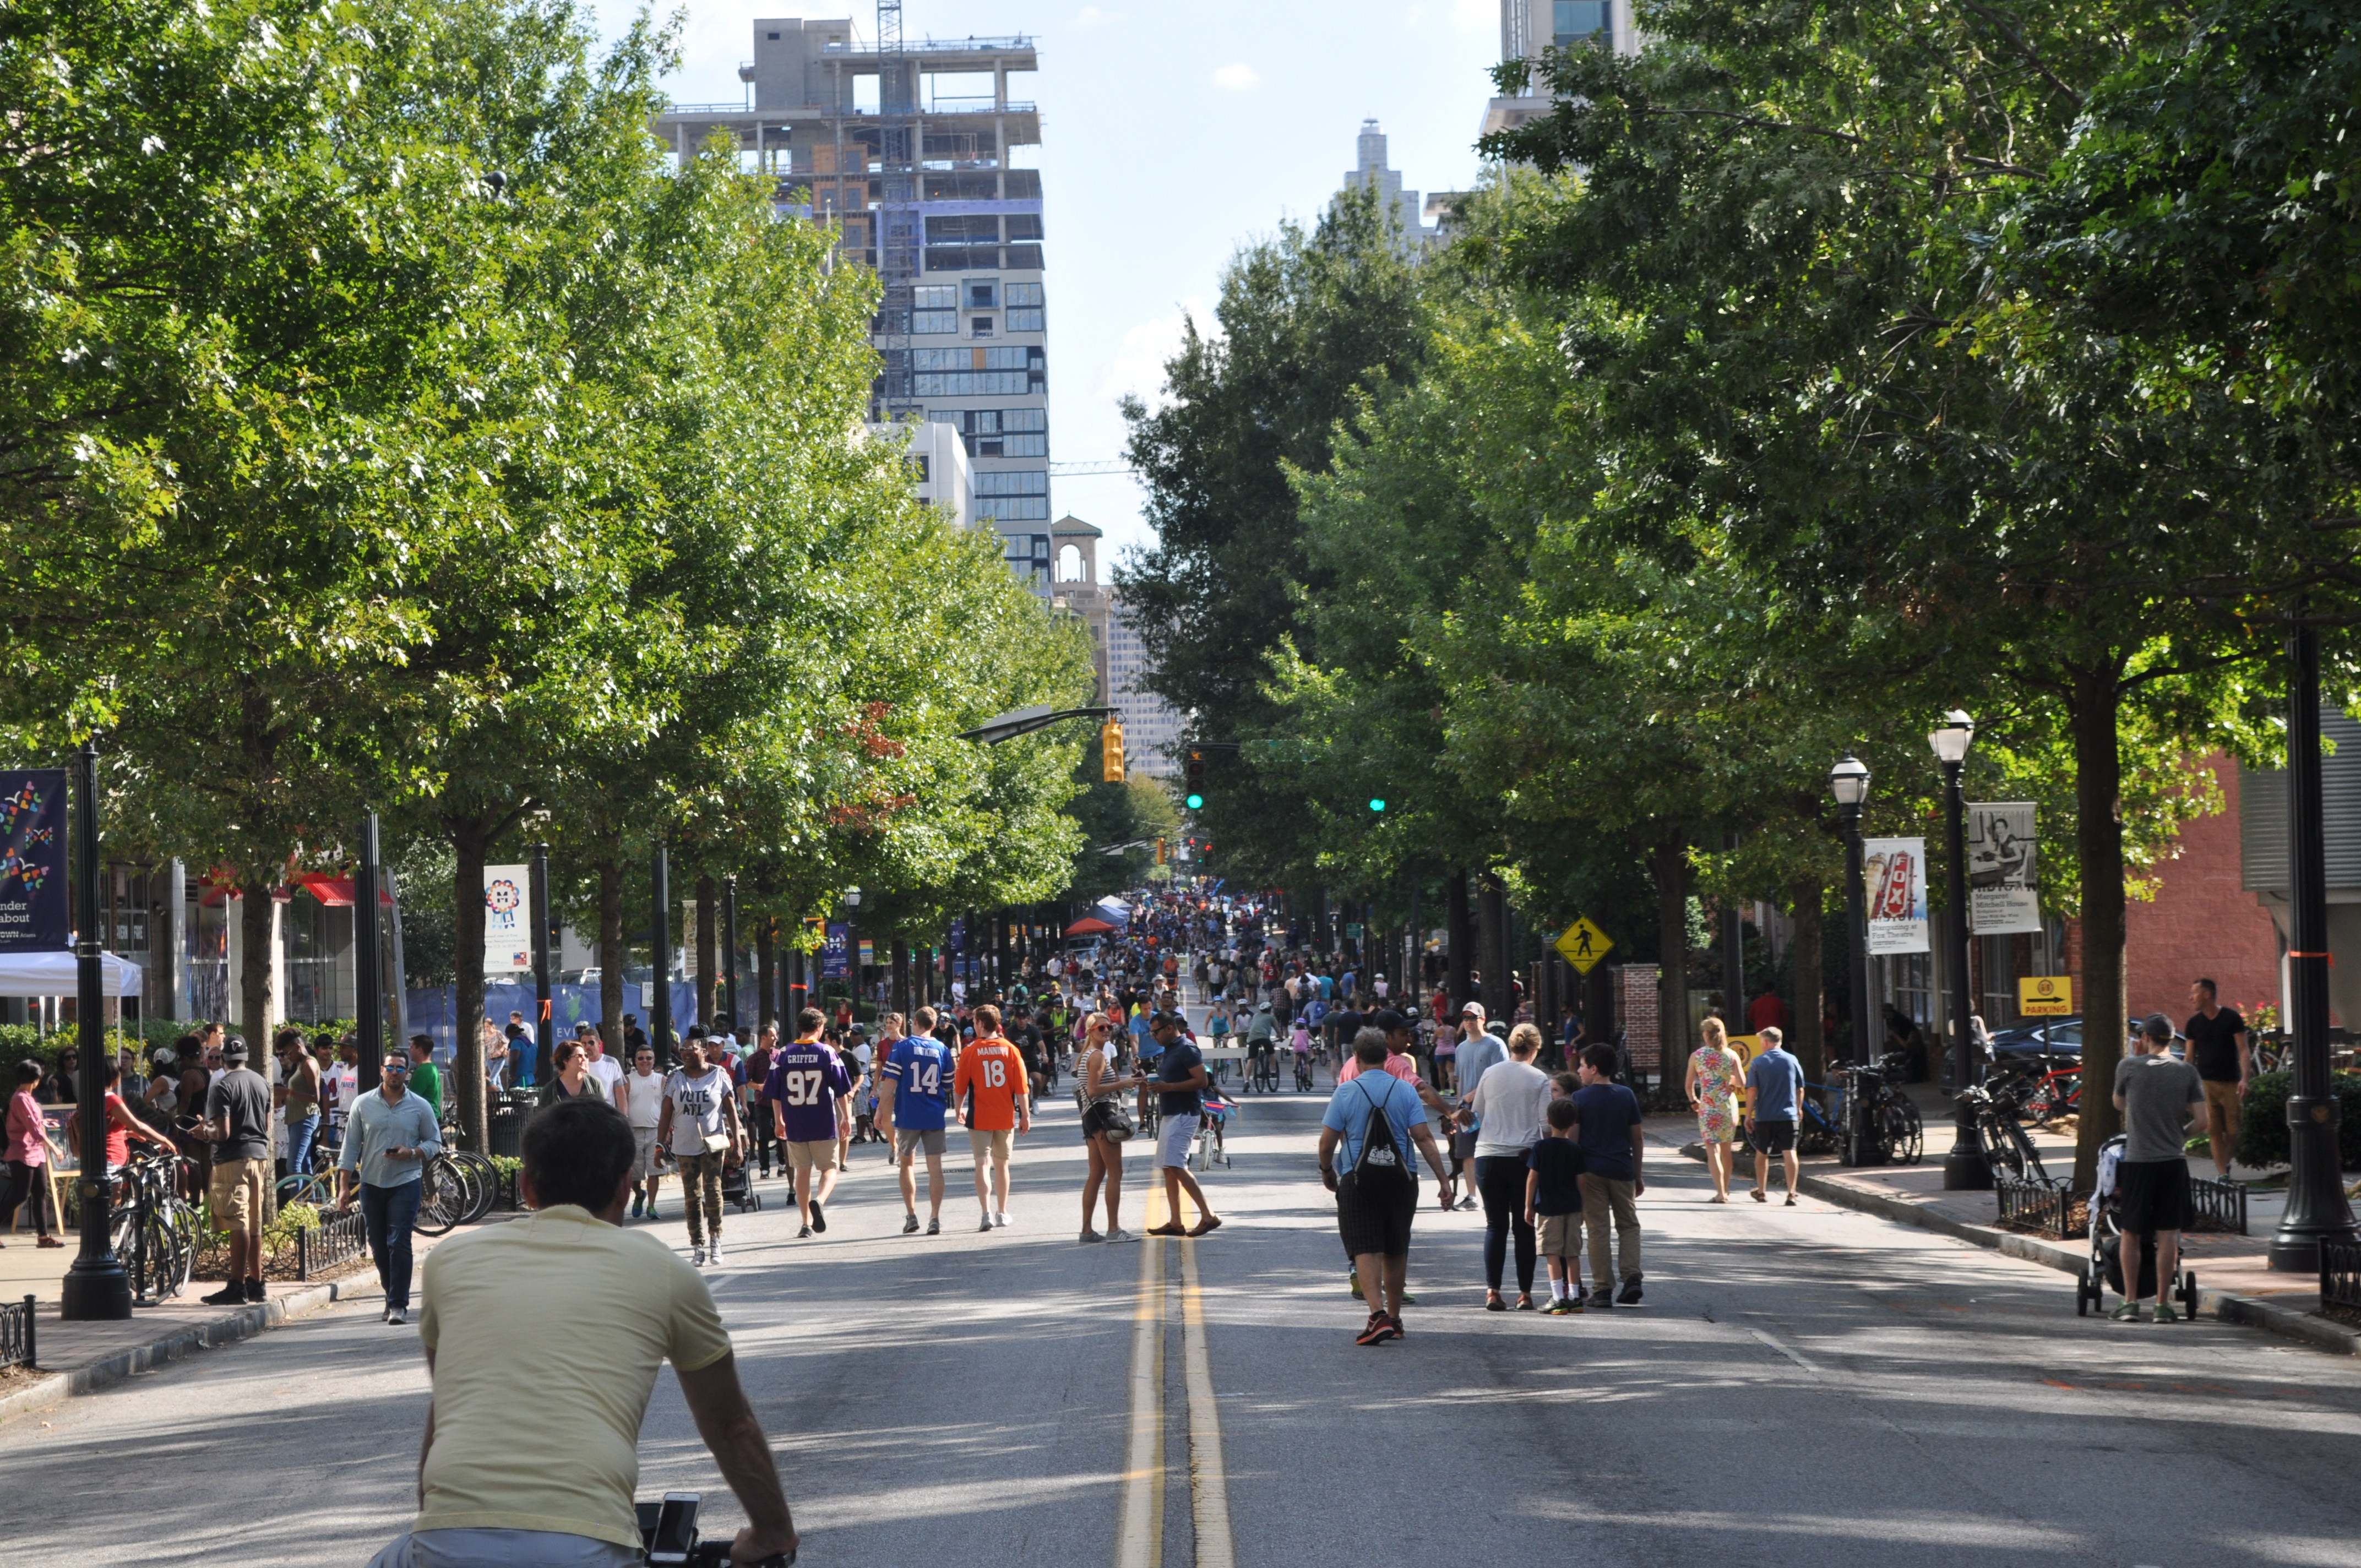 A view down Peachtree Street, with hundreds of cyclist and pedestrians packing the street.